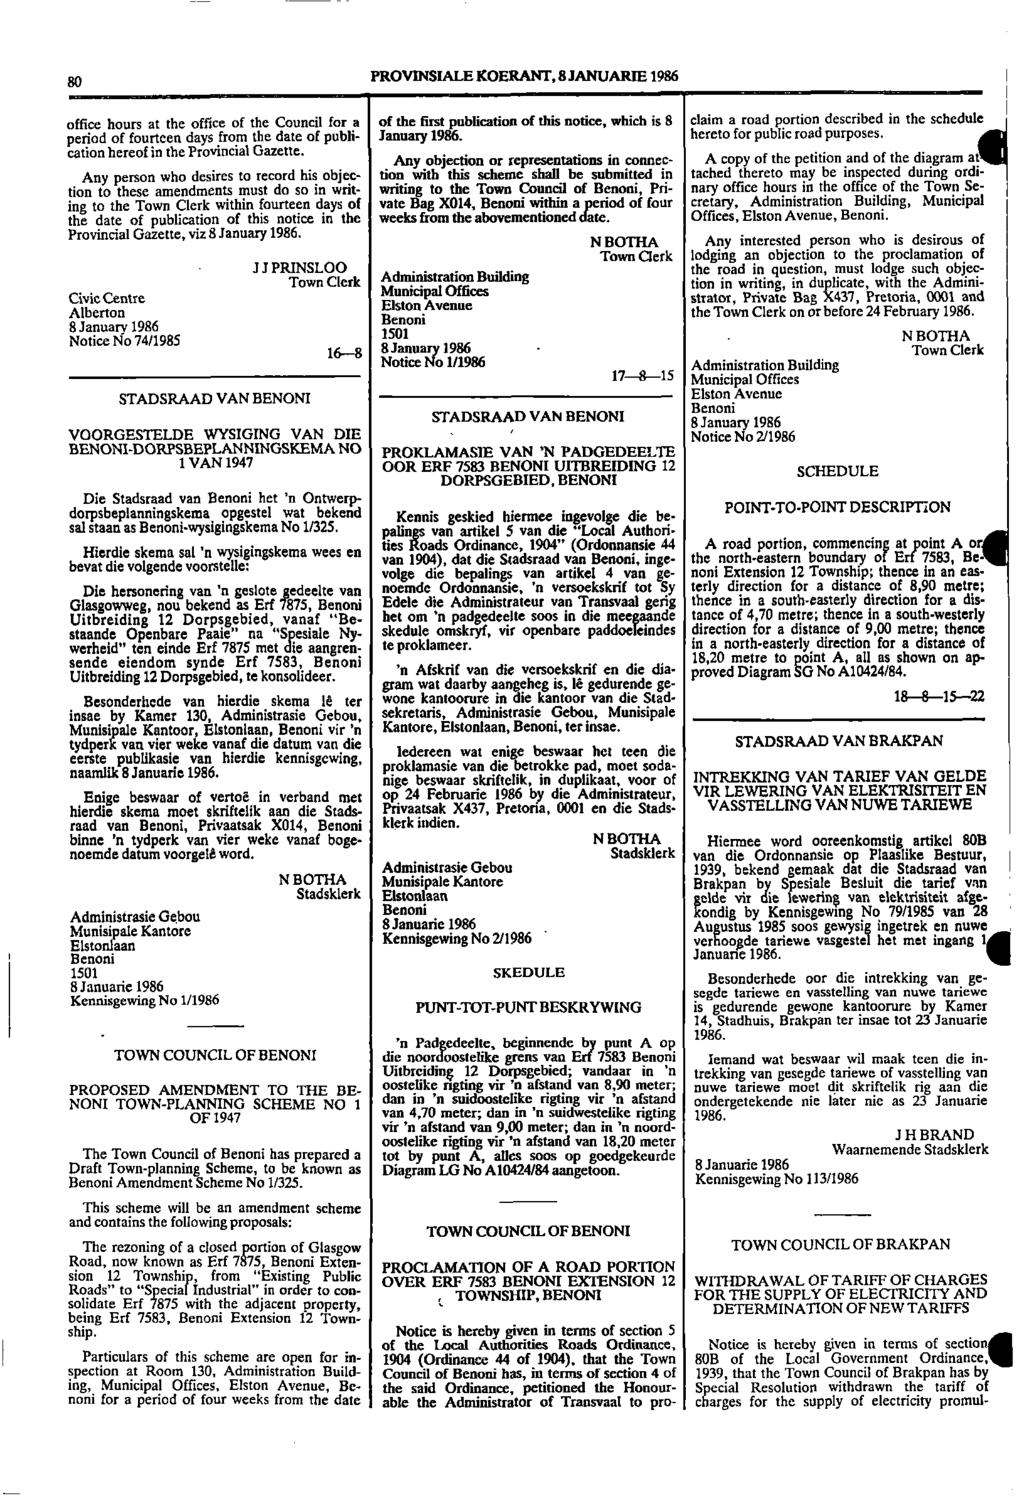 1 80 PROVINSIALE KOERANT, 8 IANUARIE 1986 office hours at the office of the Council for a of the first publication of this notice, which is 8 claim a road portion described in the schedule period of